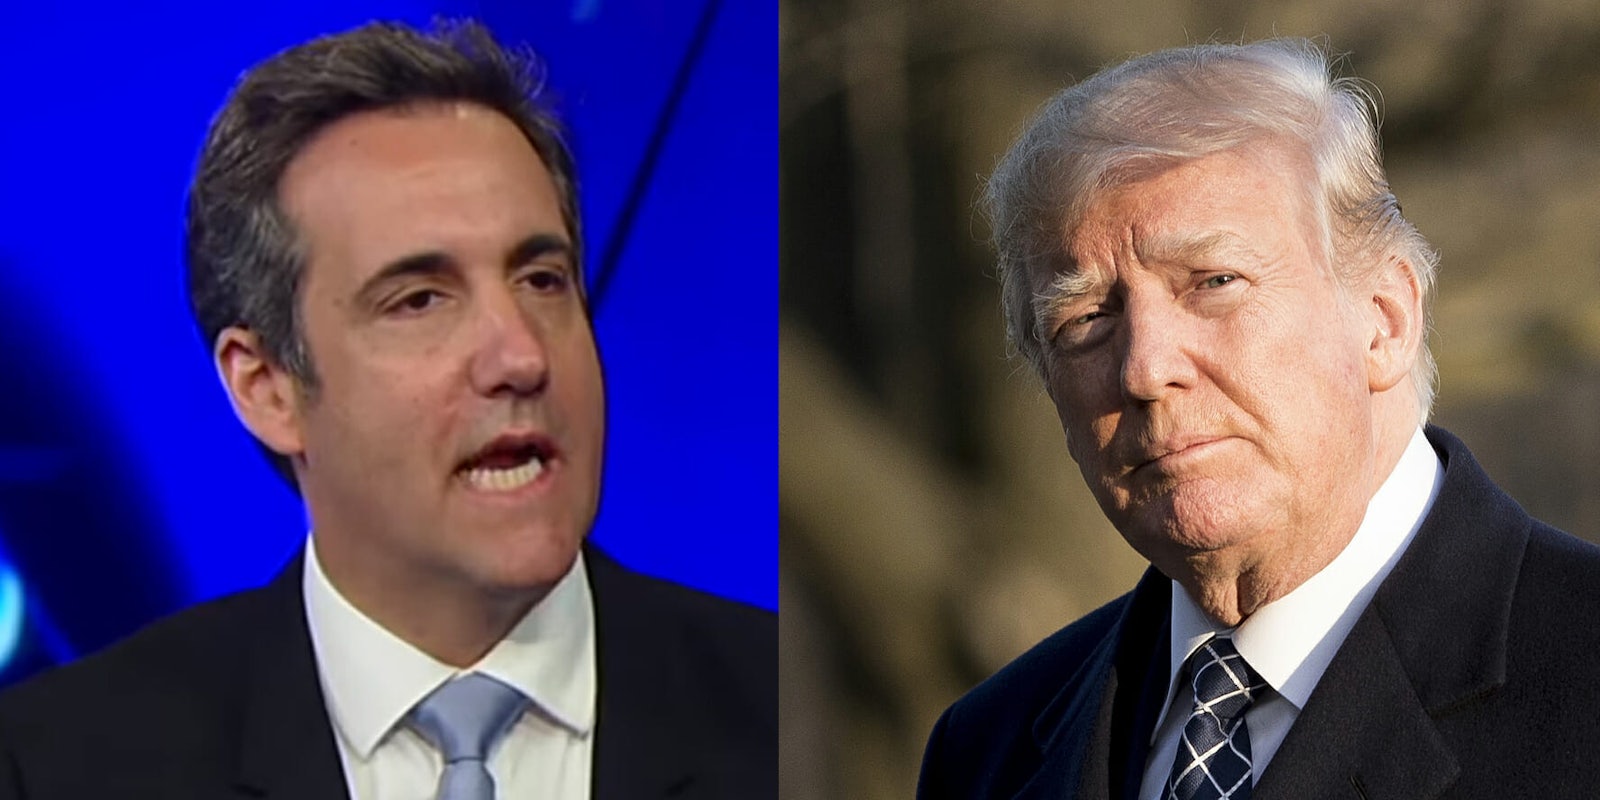 Michael Cohen, President Donald Trump's former long-time lawyer, contradicted statements the president made about hush money payments made to women who claimed to have had affairs with Trump during an interview with GMA on Friday.